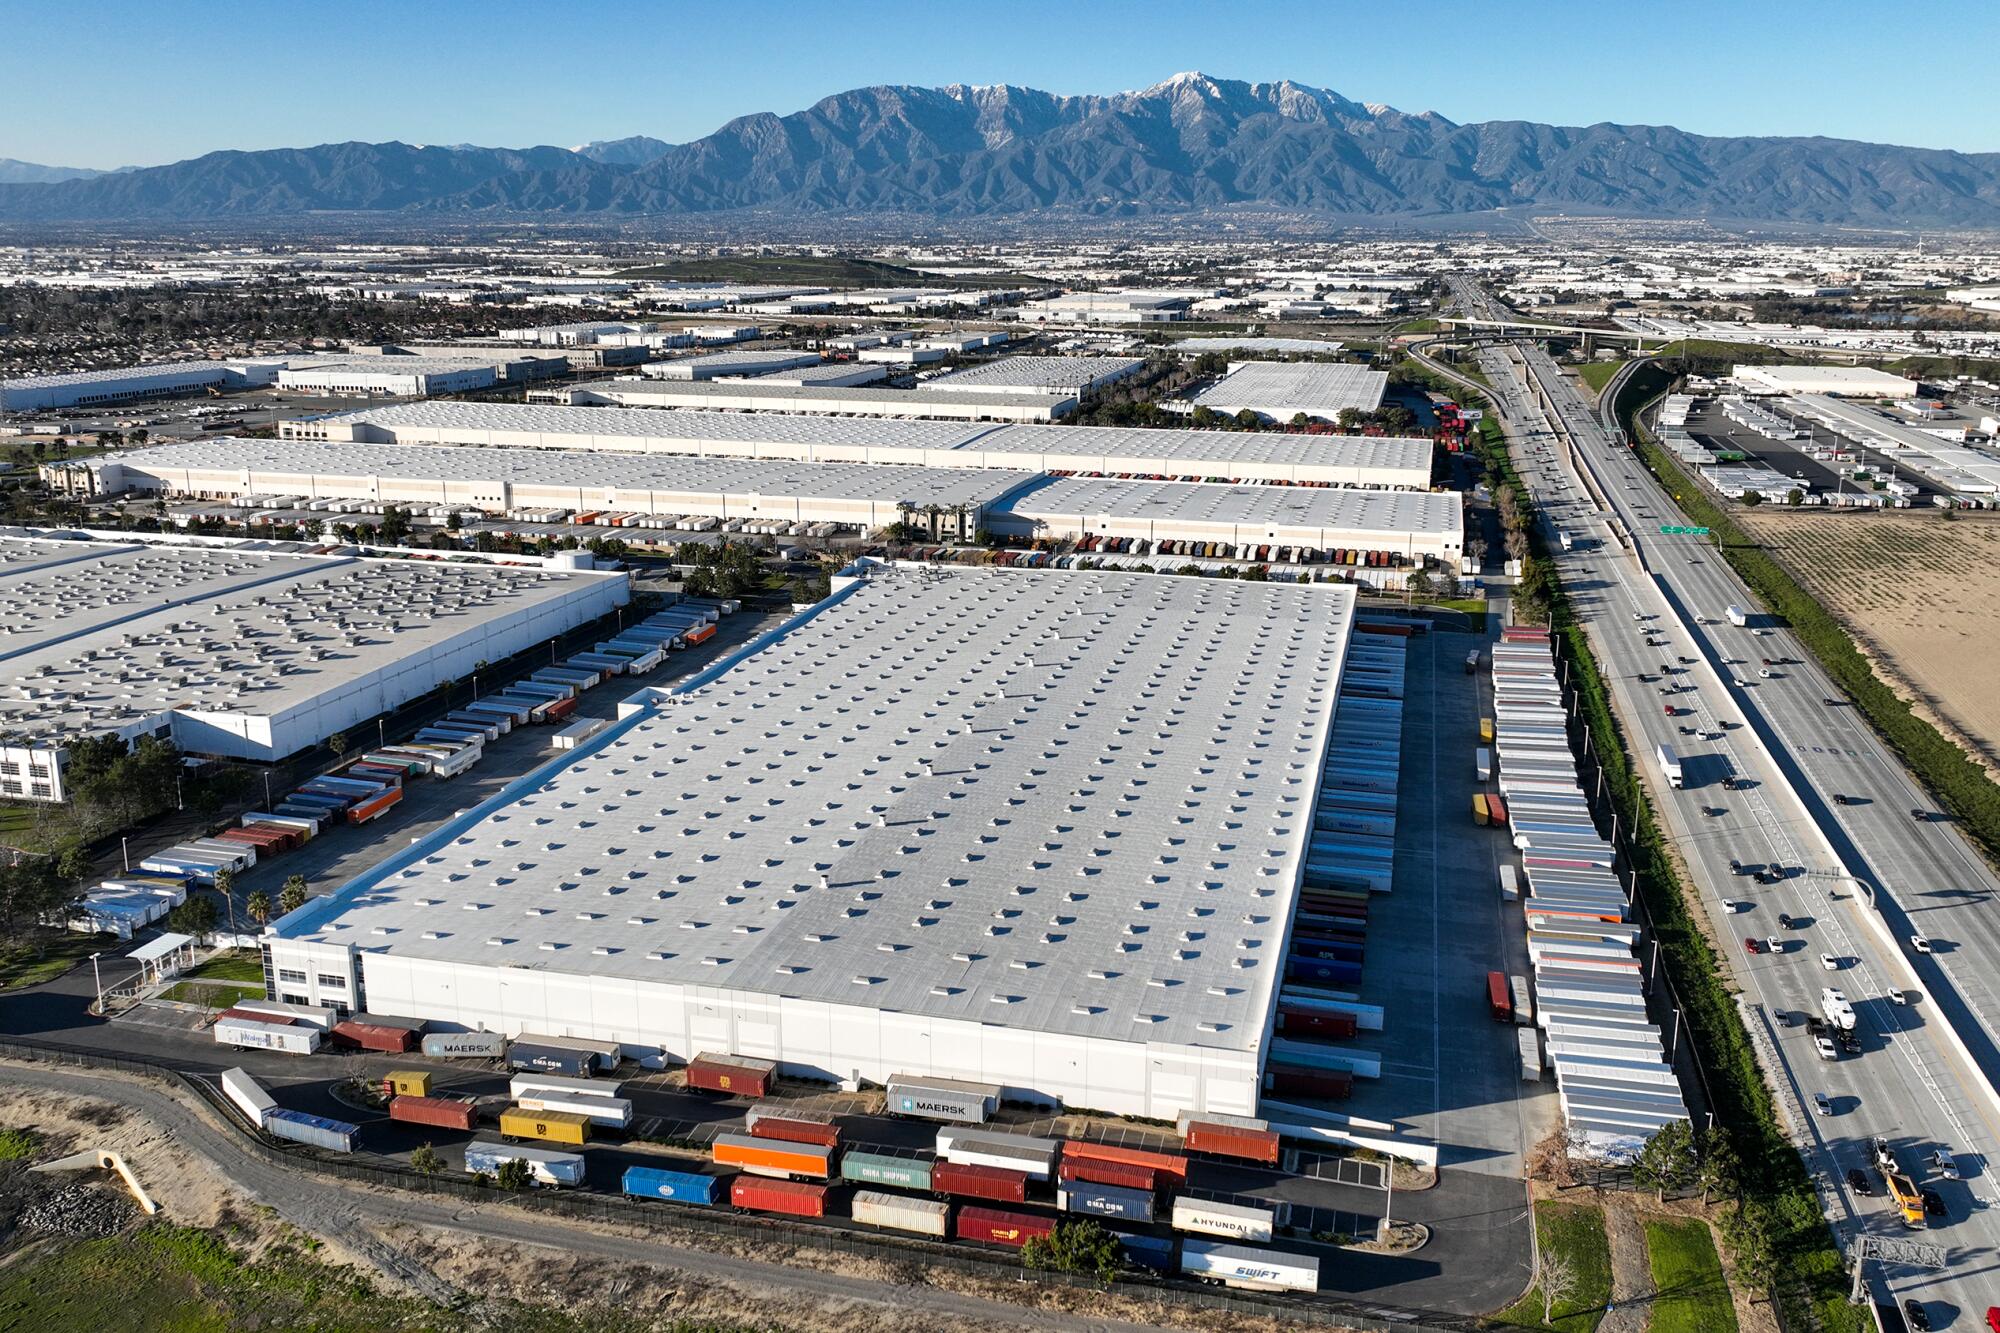 A Walmart distribution center located along I-15 in Eastvale.  